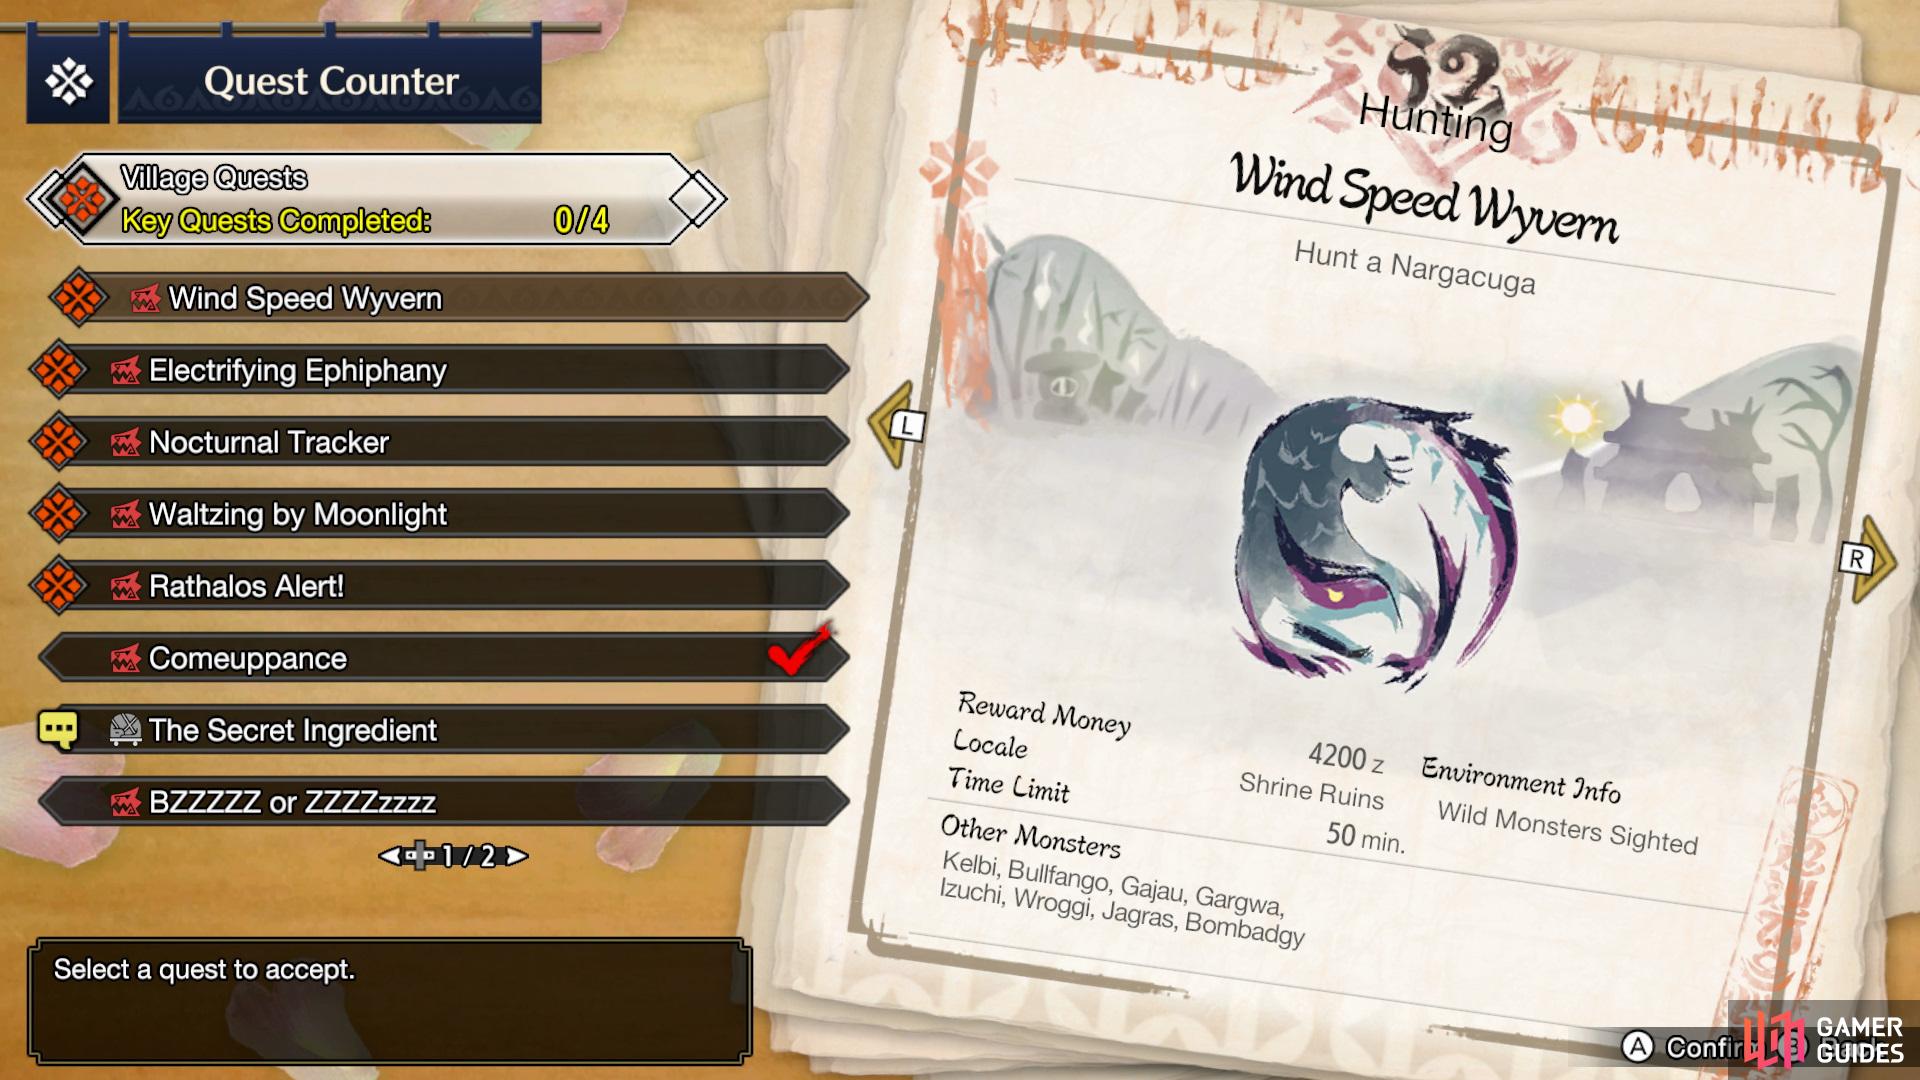 The Wind Speed Wyvern quest becomes available when you reach 5* Village Quests.